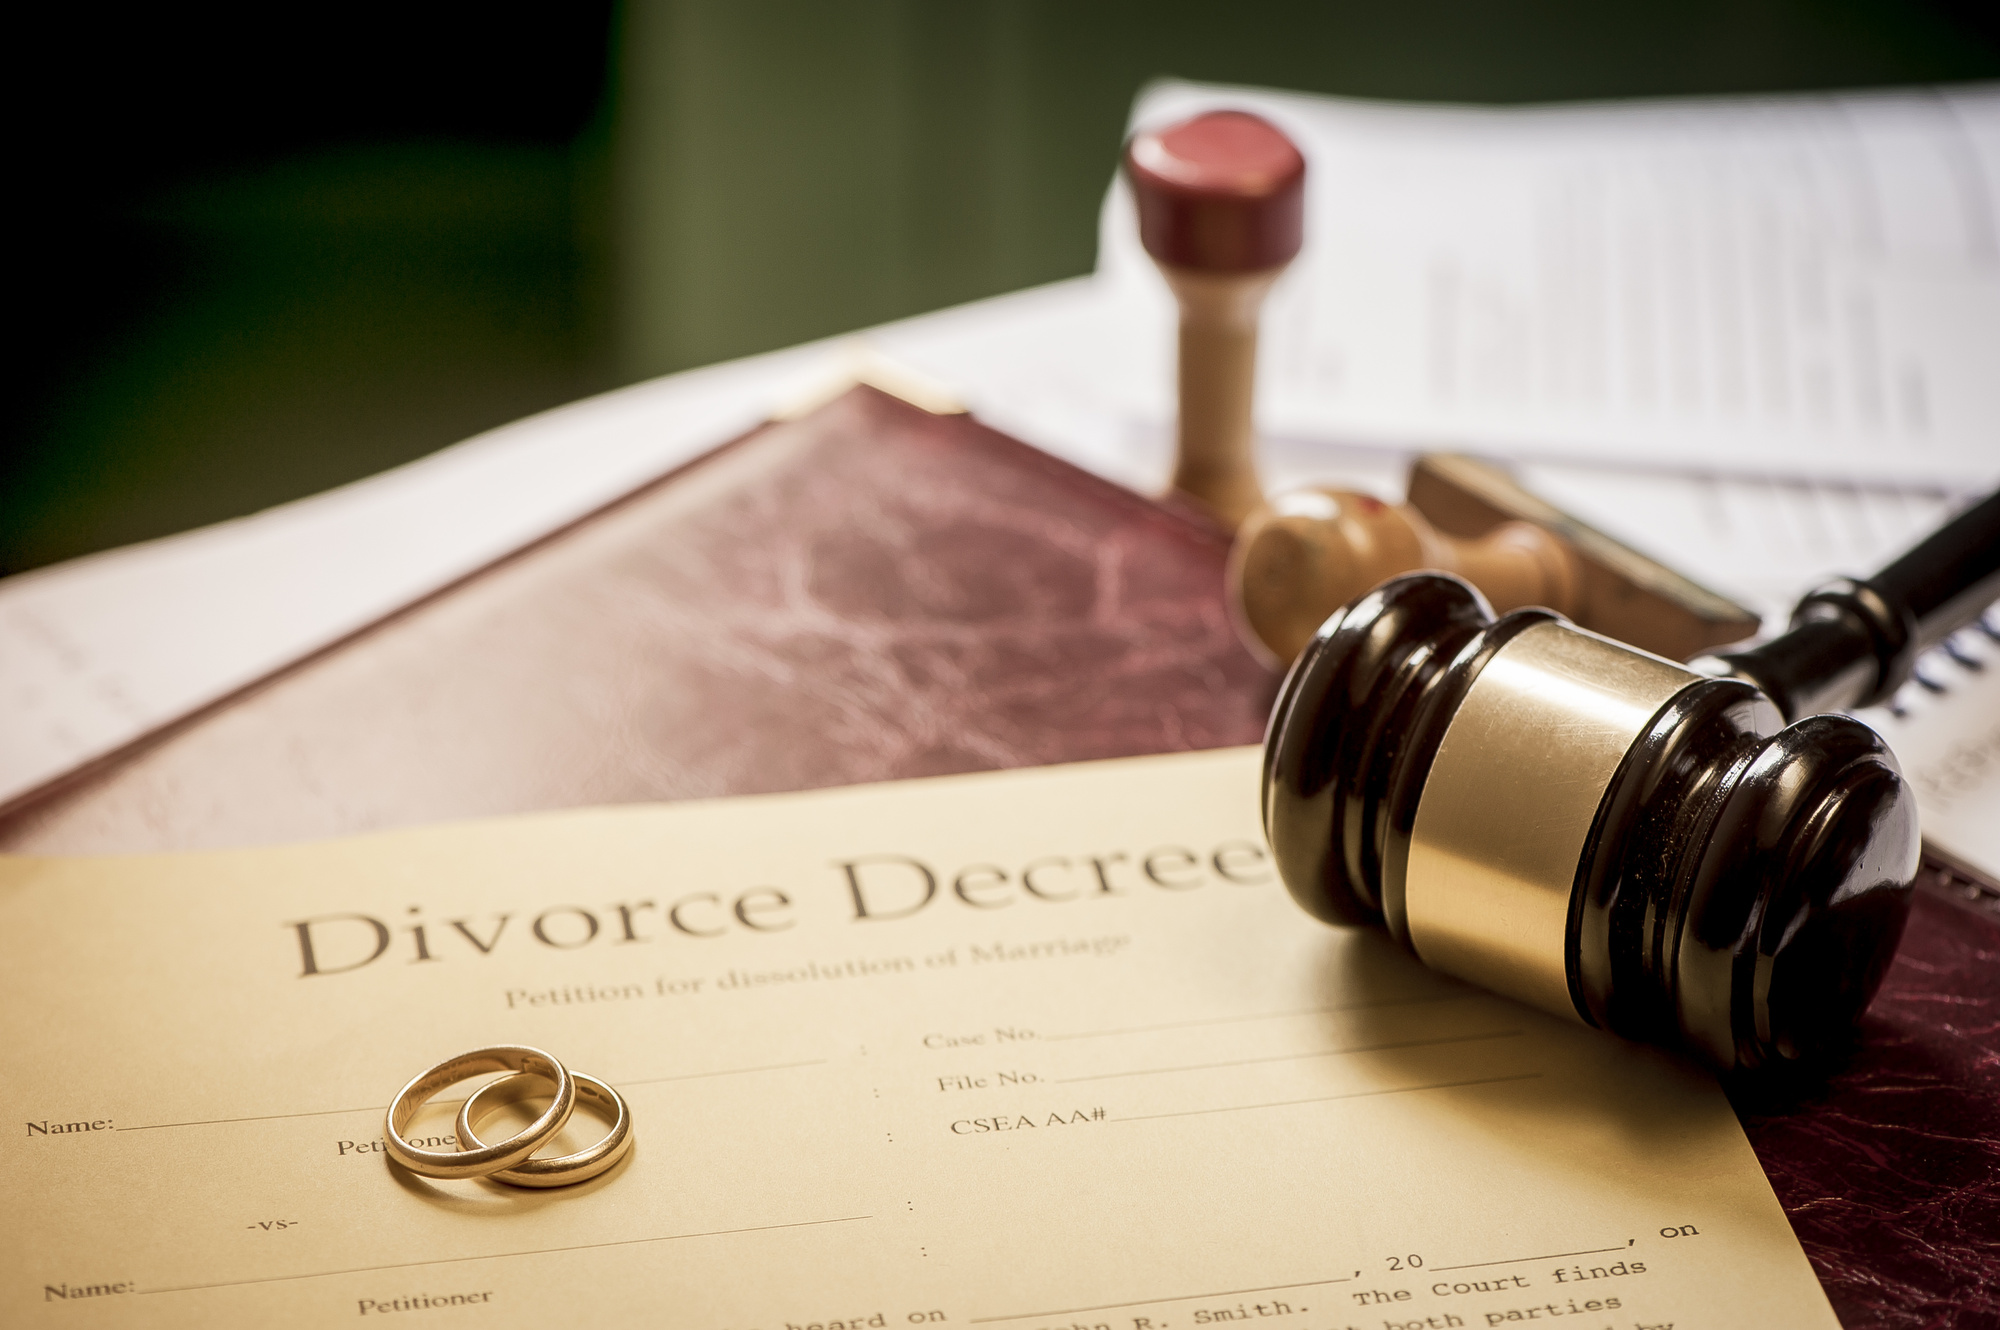 Zimbabwe has recorded an upsurge in the number of divorces